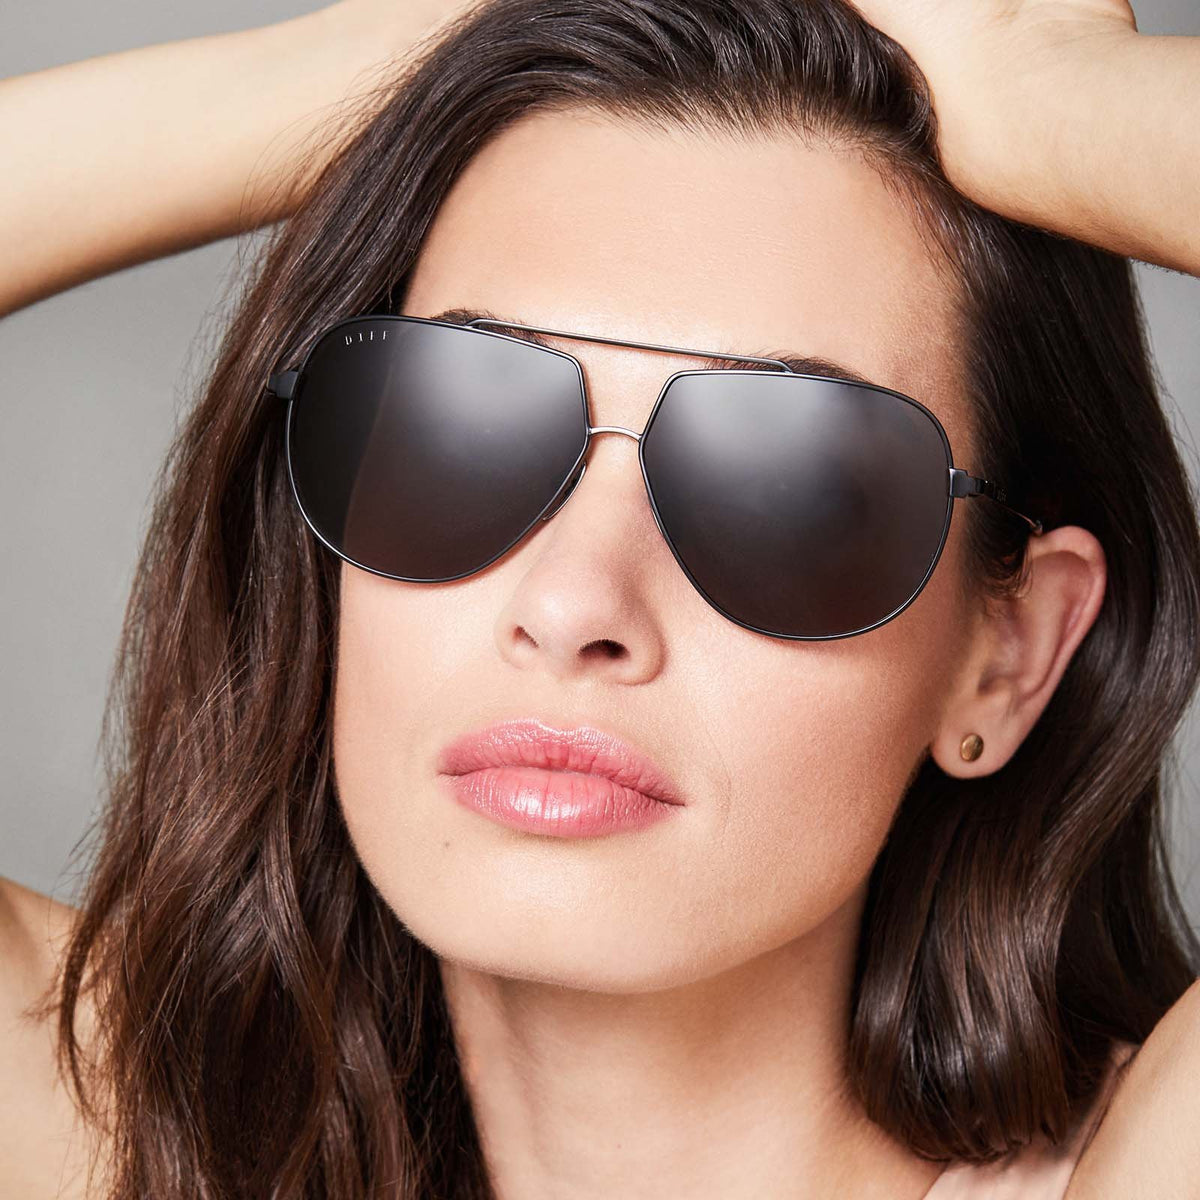 Sunglasses with black frames and grey polarized lens on a female model